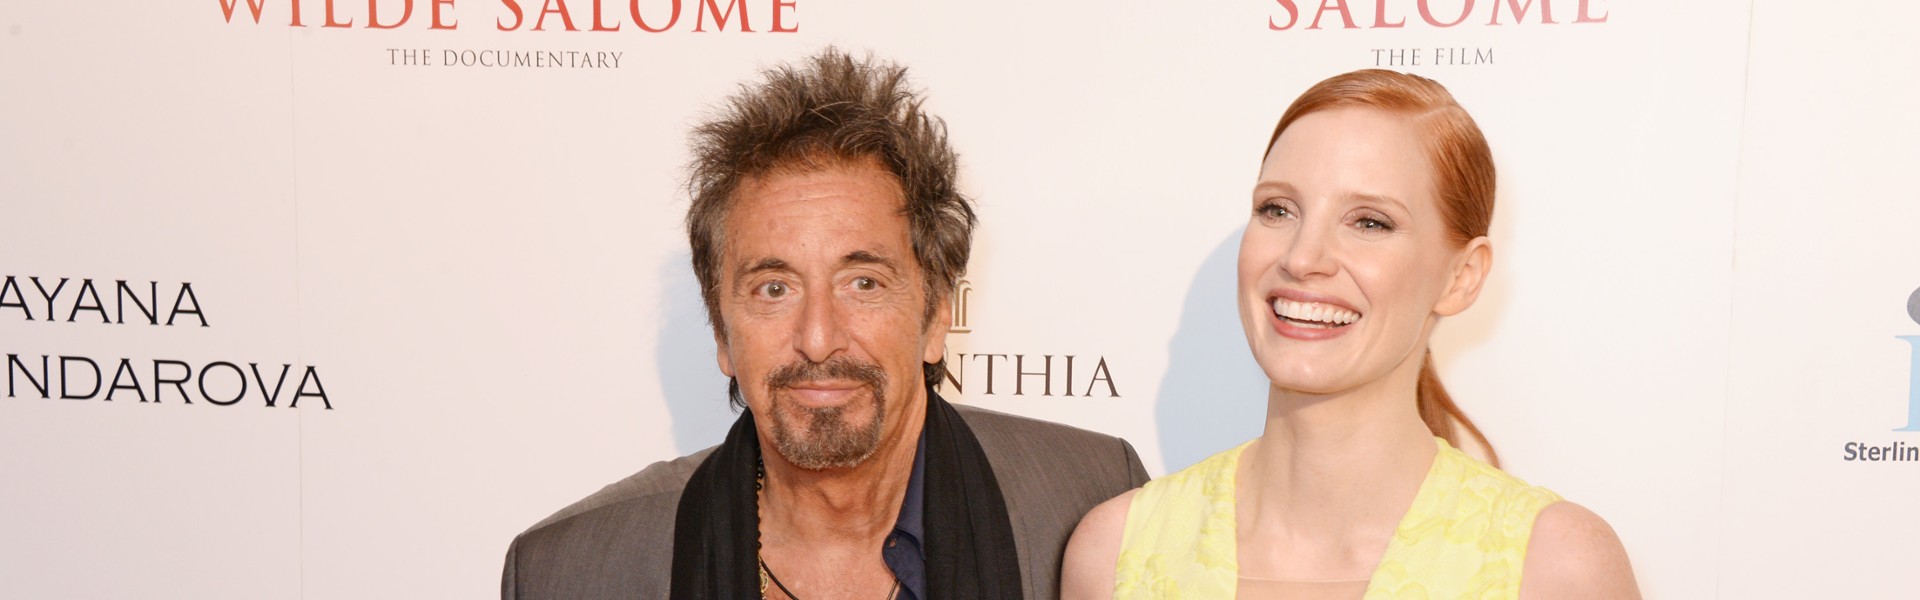 Al Pacino and Jessica Chastain in a new adaptation of “King Lear”!